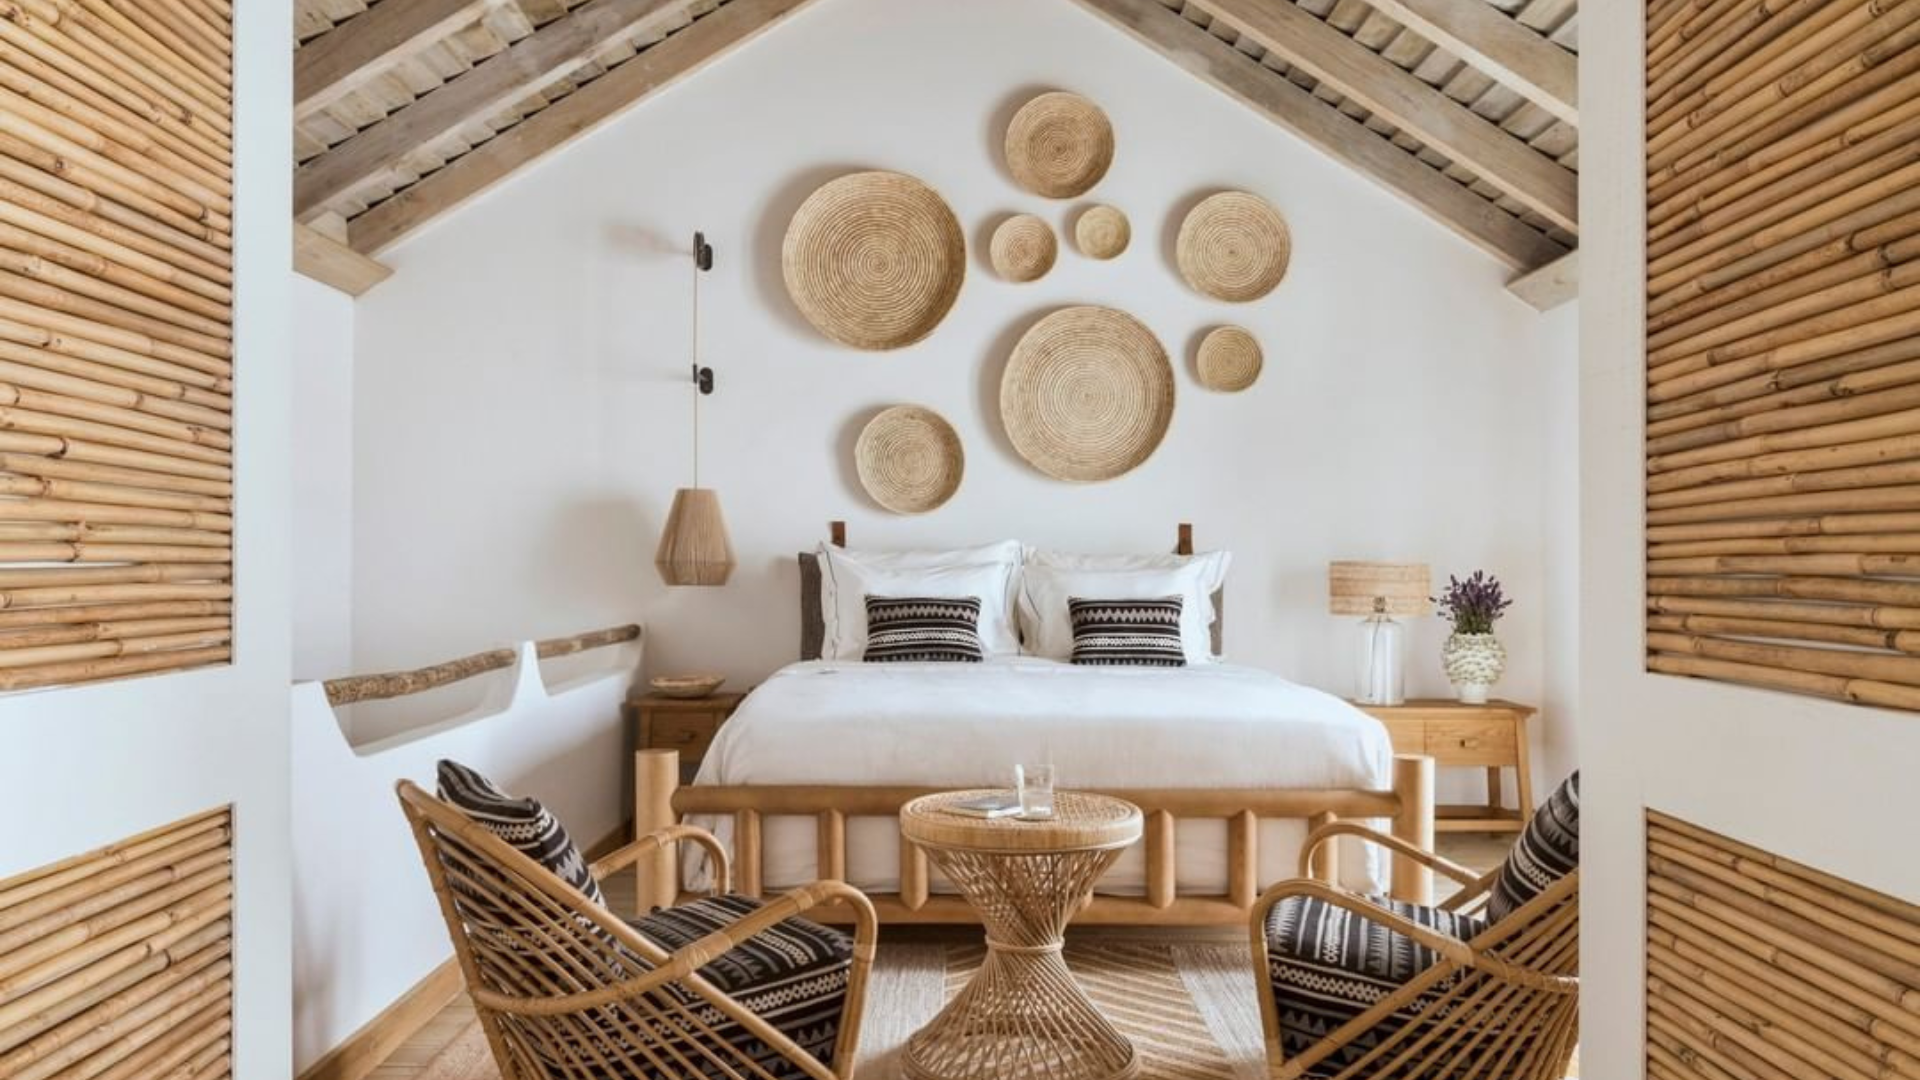 The best hotels in Portugal according to Condé Nast Traveller (6)